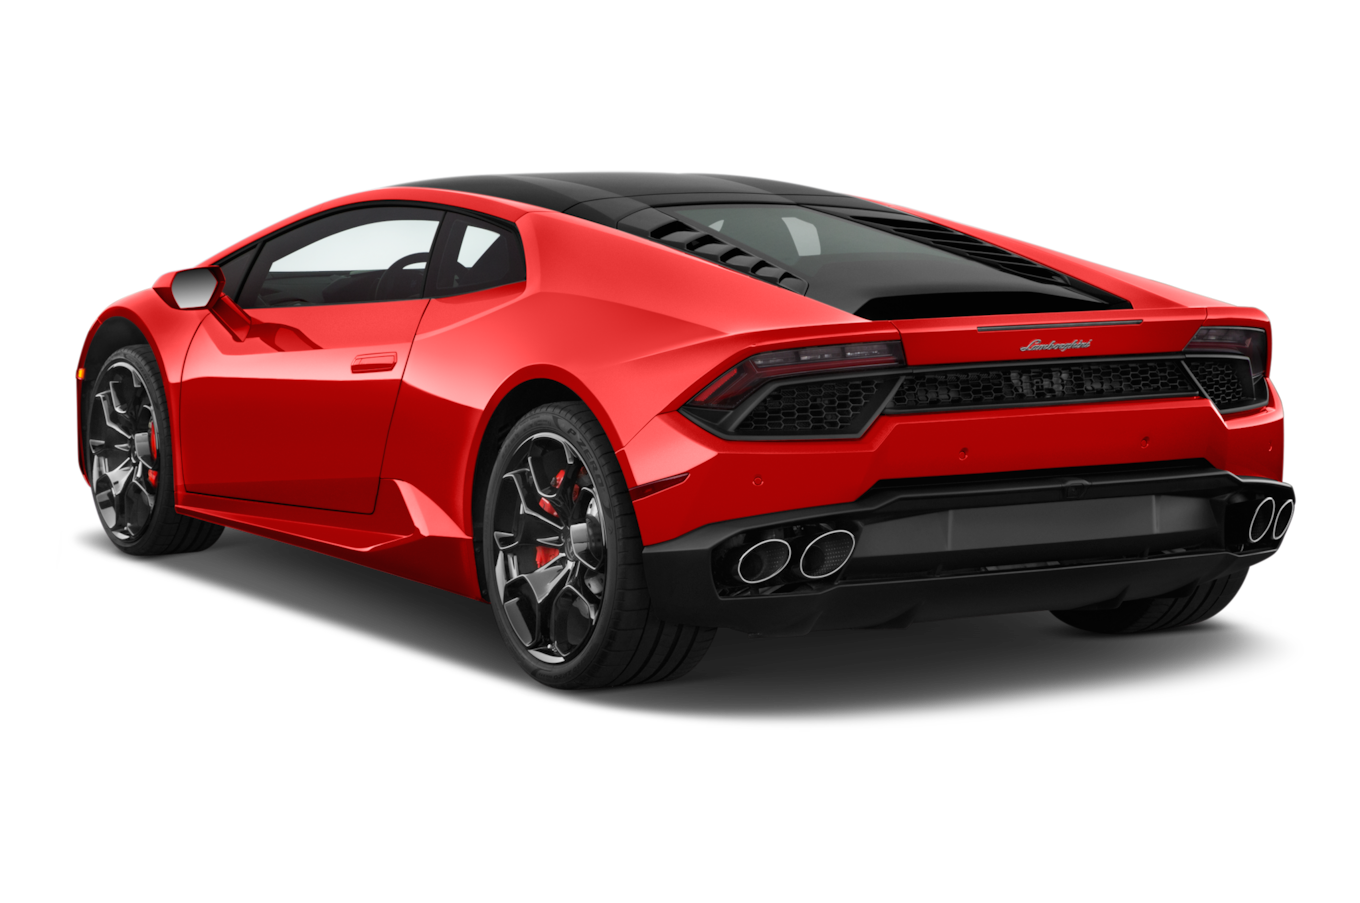 Picture Convertible Lamborghini Red HD Image Free PNG Image